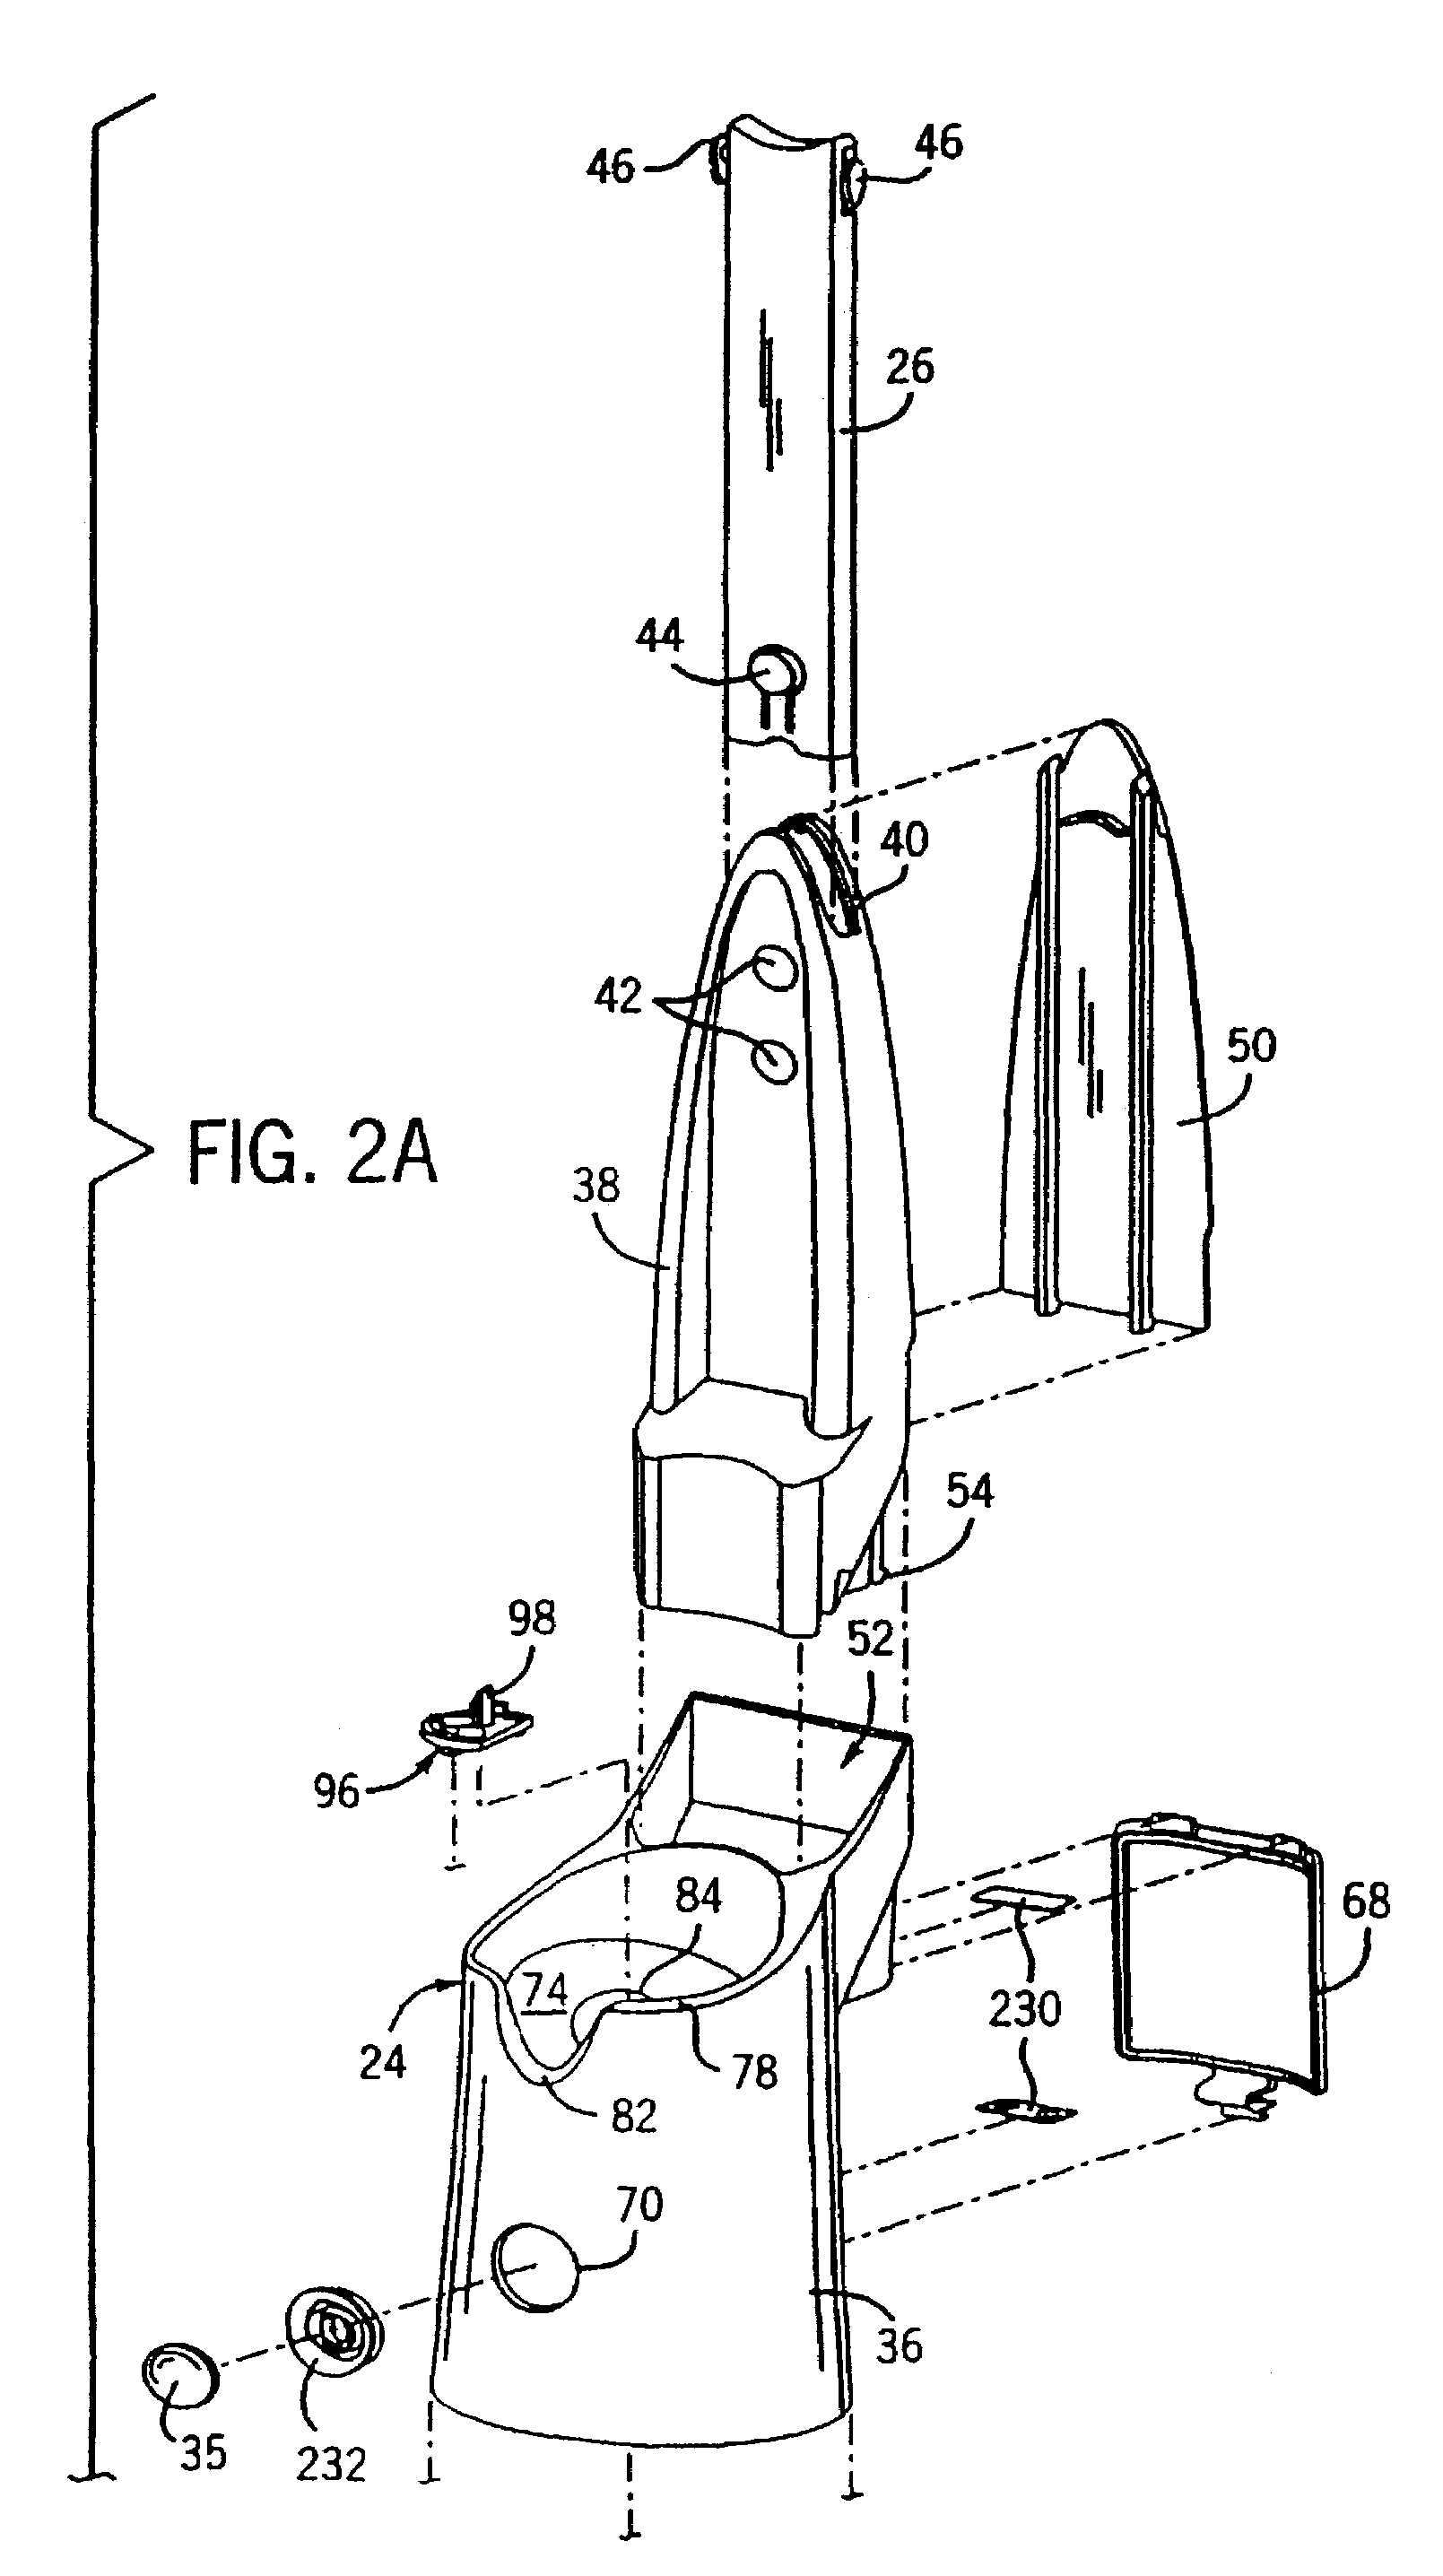 Bottle adapter for dispensing of cleanser from bottle used in an automated cleansing sprayer